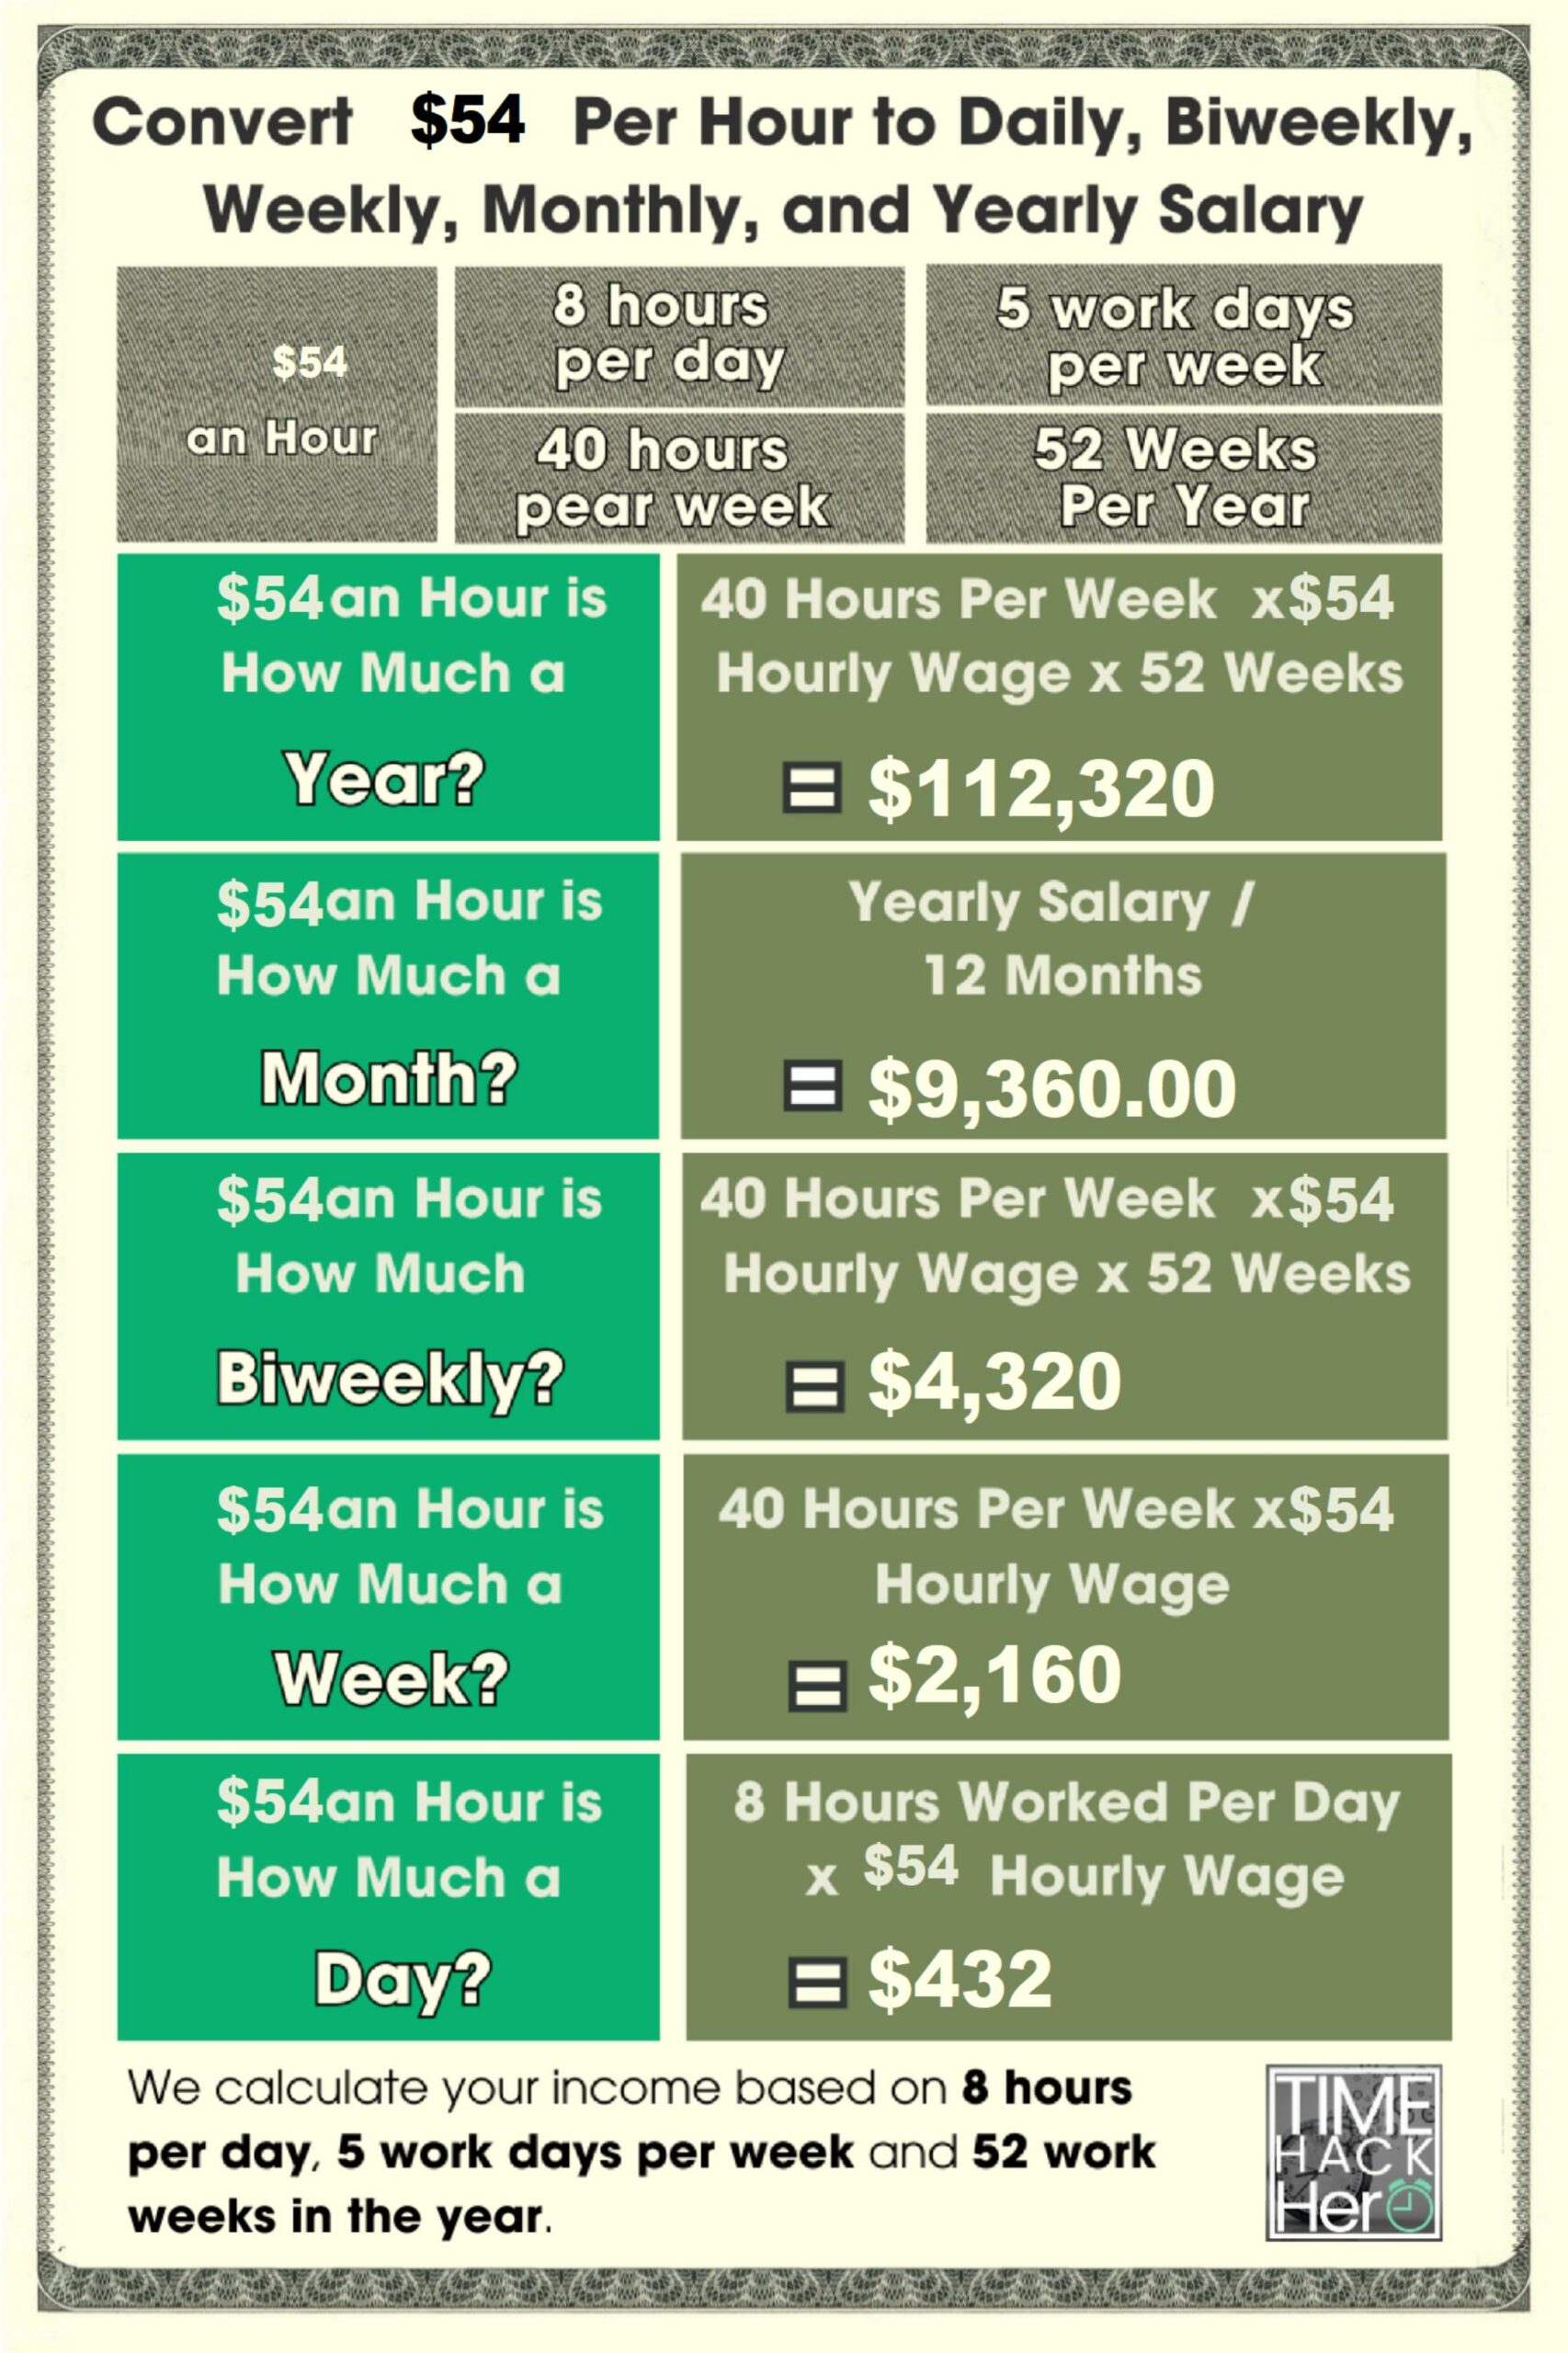 Convert $54 Per Hour to Weekly, Monthly, and Yearly Salary